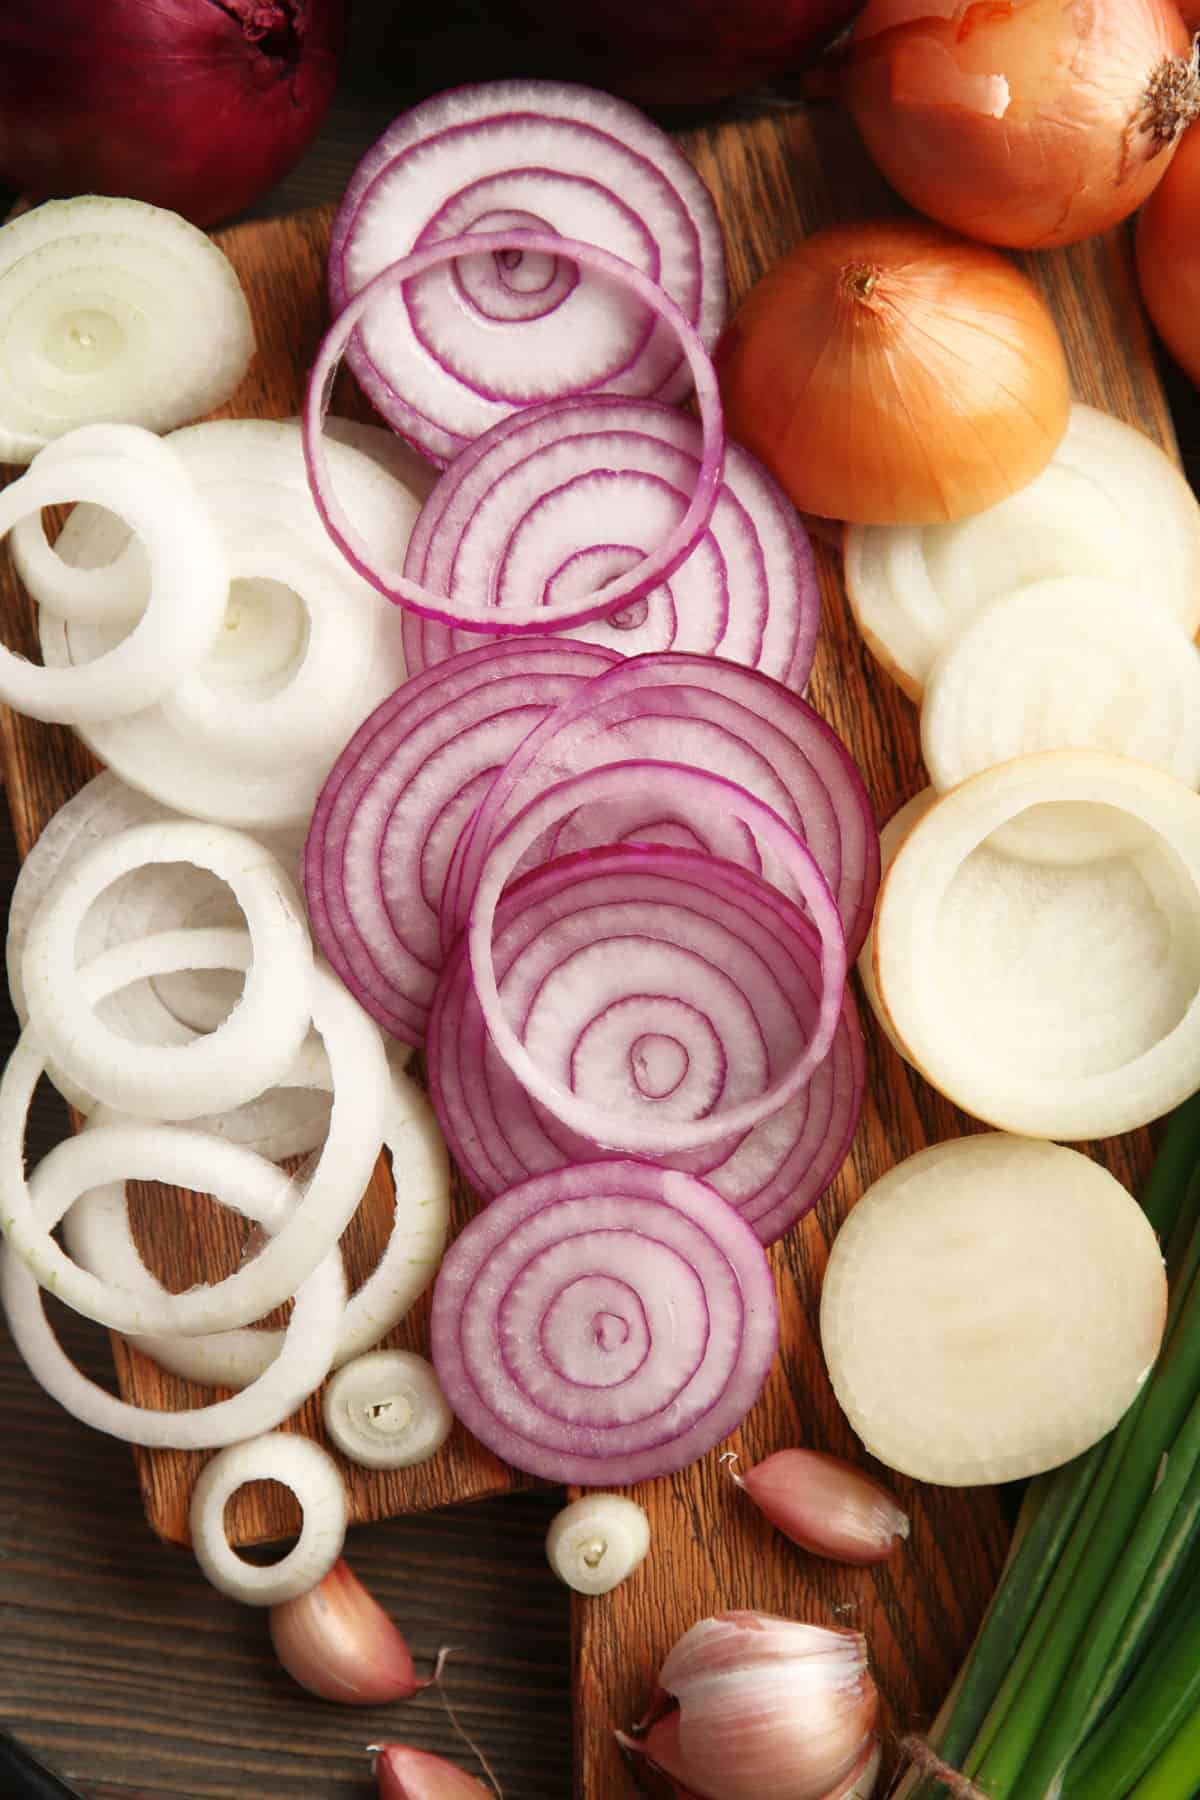 Sliced onions spread out on a board.